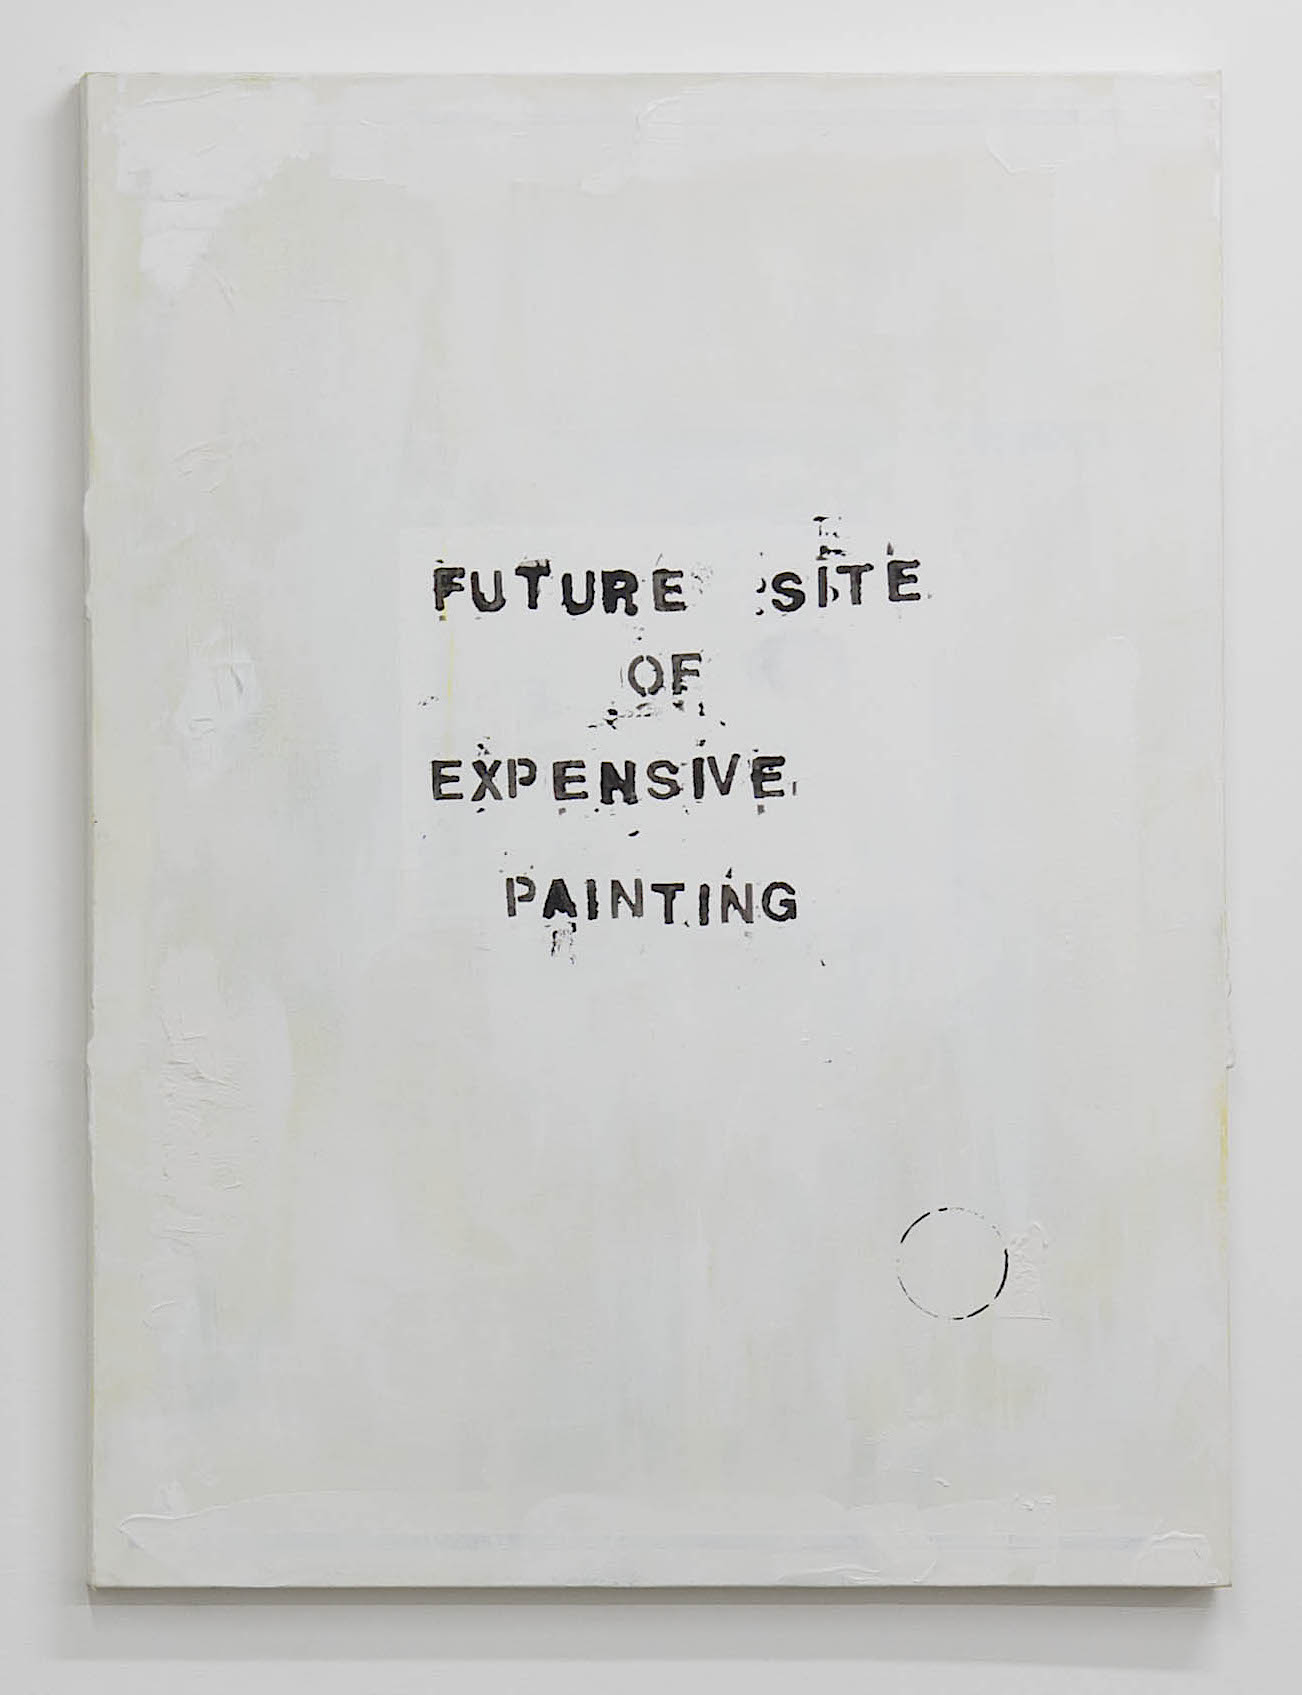  Alejandro Diaz  Future Sight of Expensive Painting , 2014 acrylic on canvas 40 x 30 in (101.6 x 76.2 cm) 